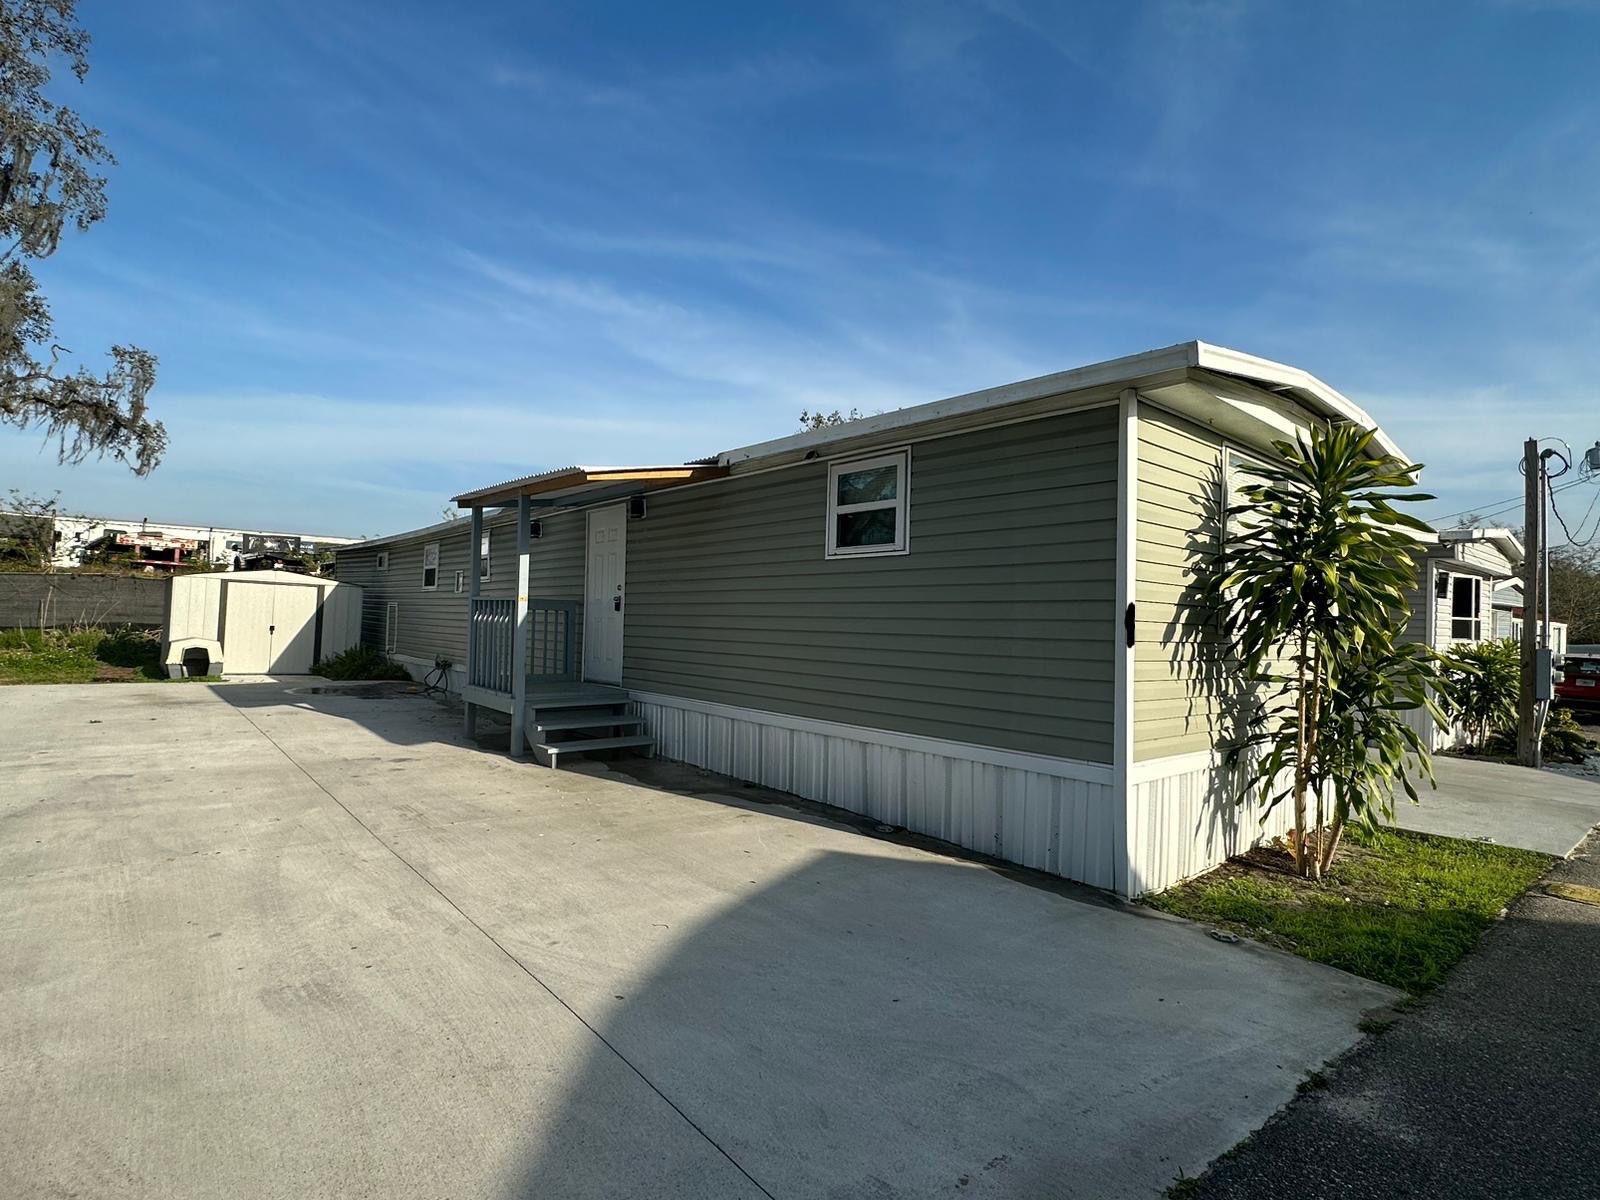 Mobile Home 66Ft 3Bed/2Bath